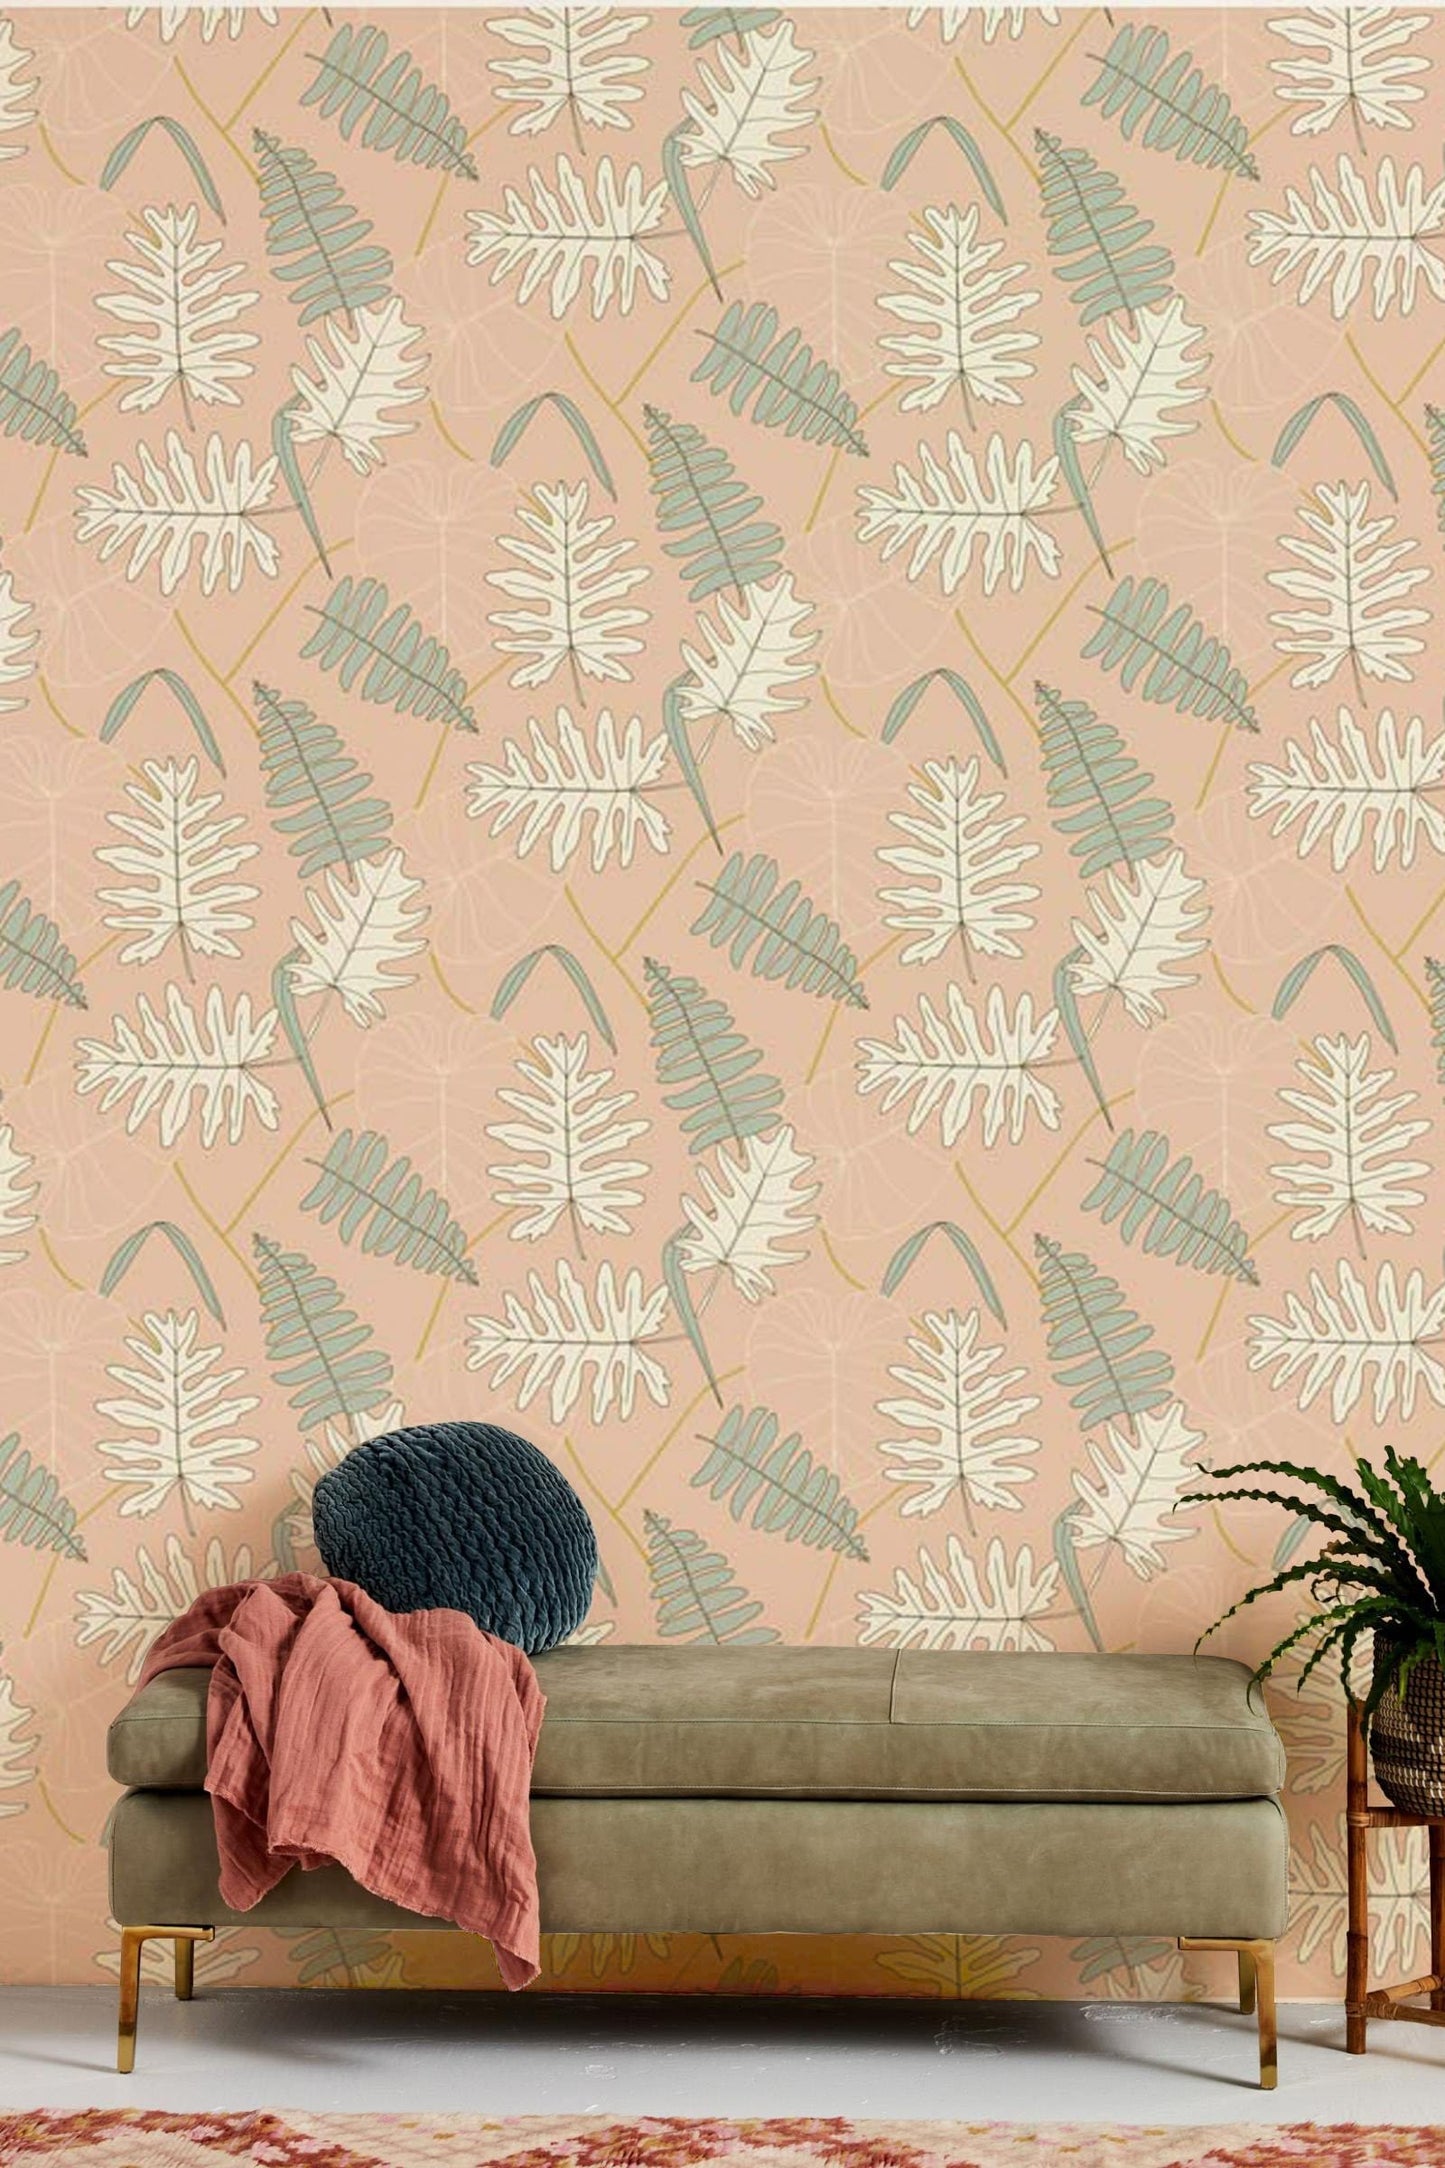 Pine needles on a pink wallpaper mural for the living room.